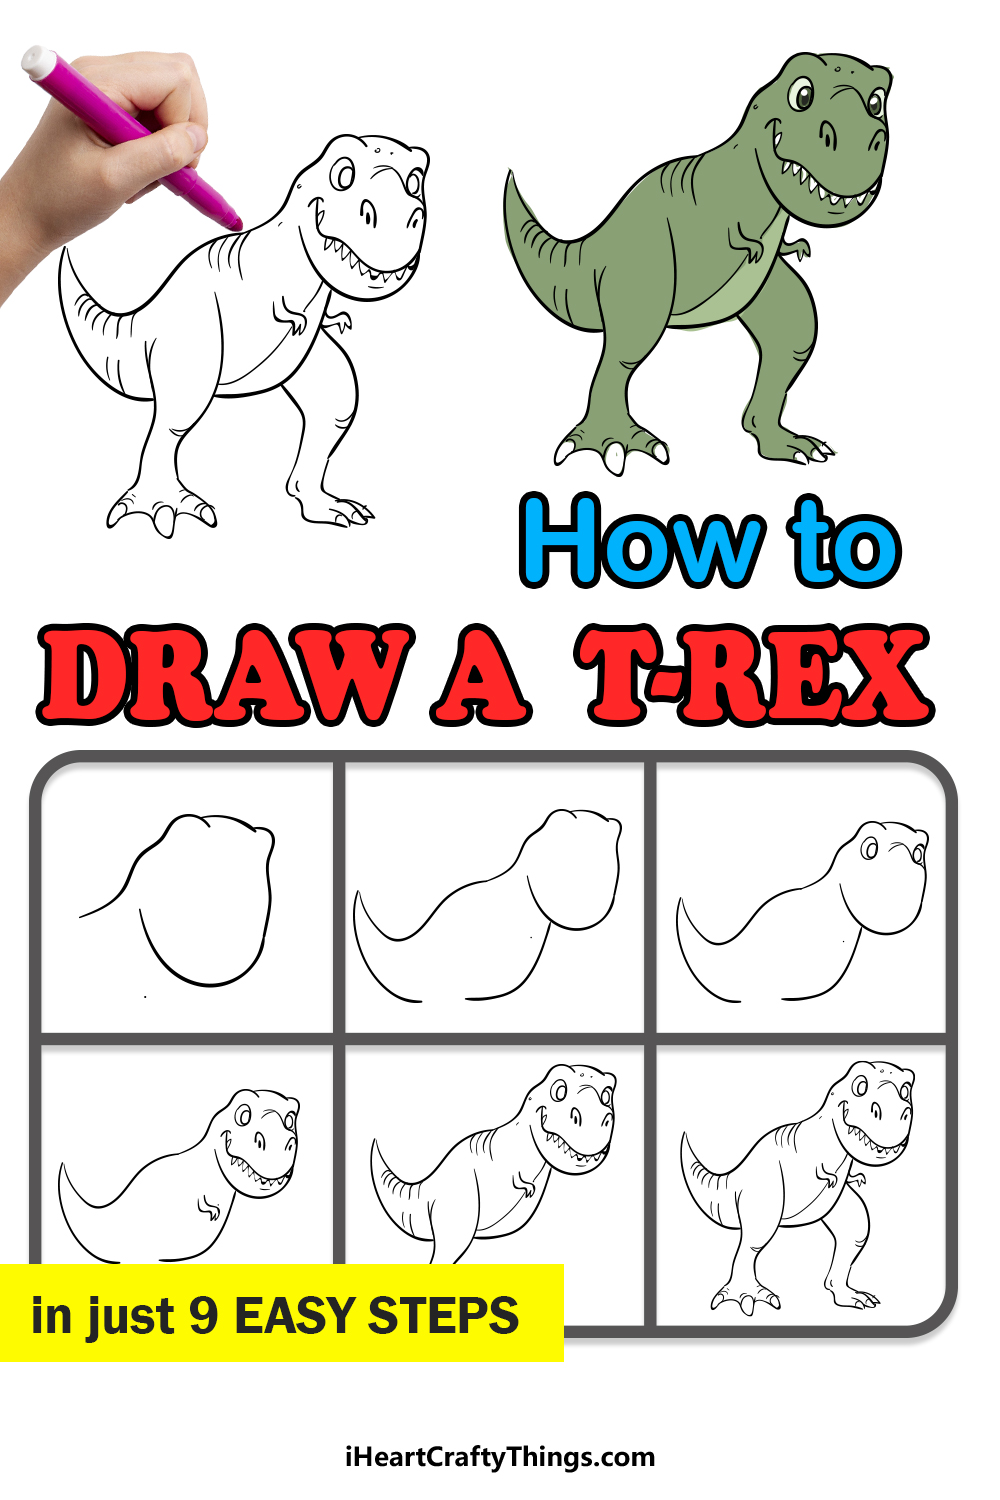 how to draw a t-rex in 9 easy steps